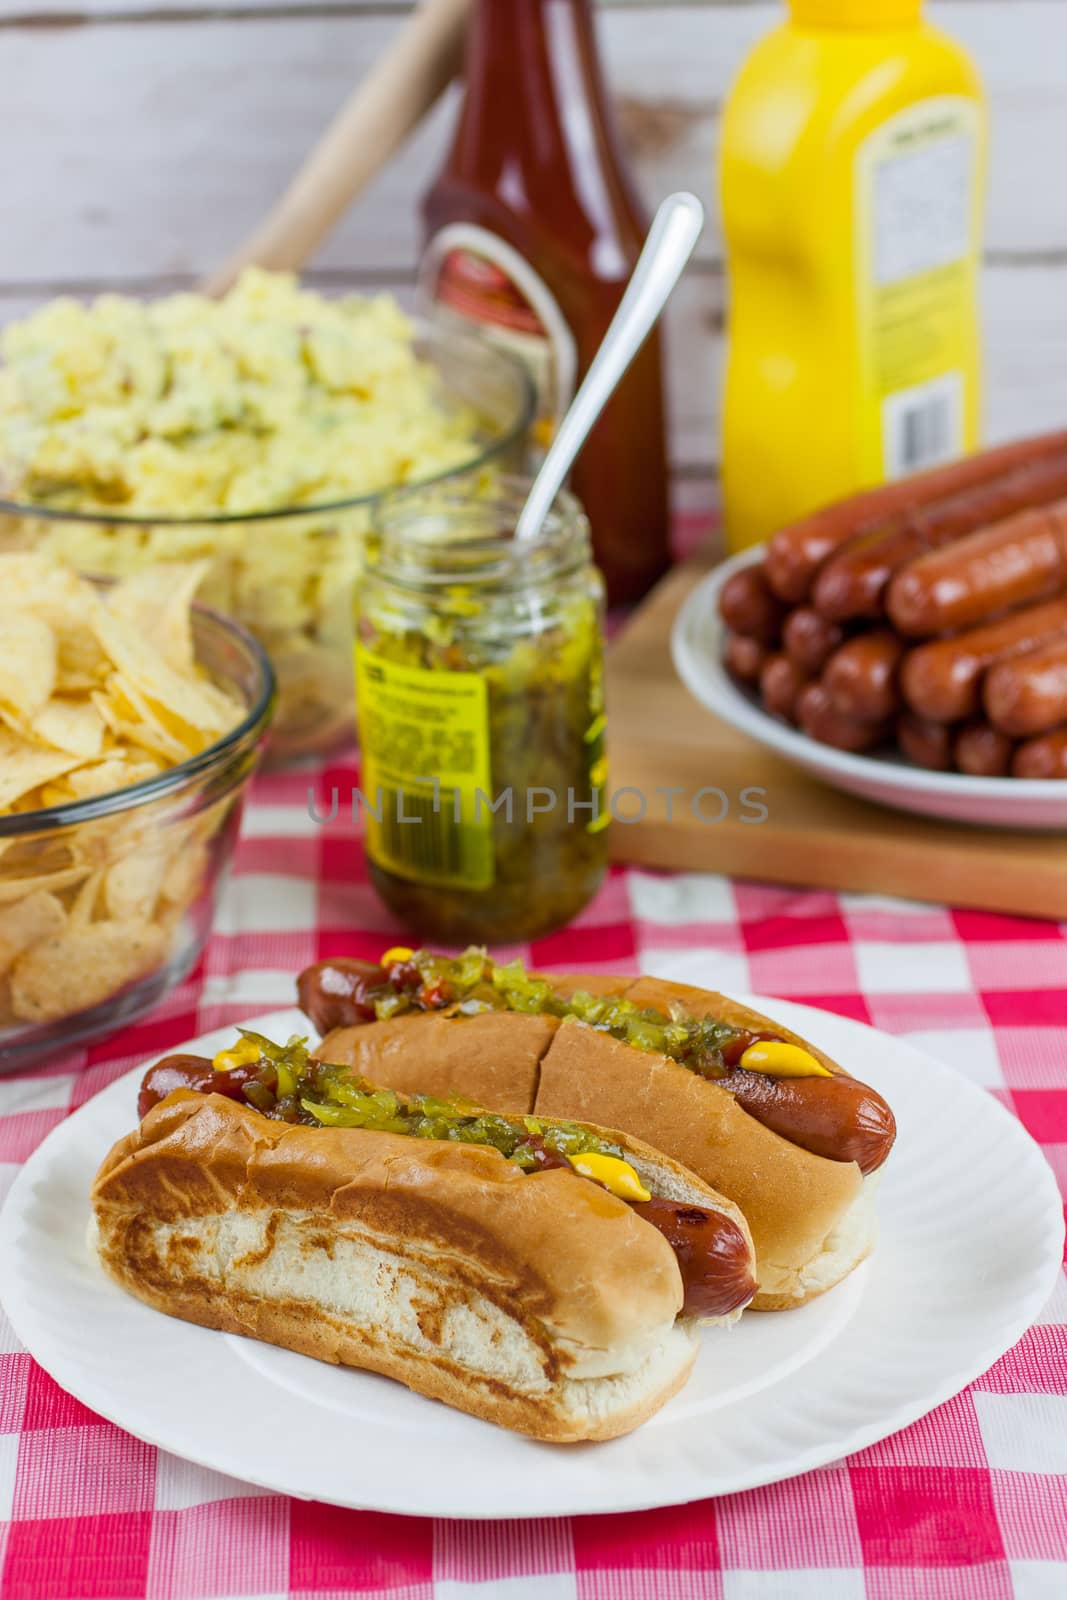 Grilled Hot Dogs by SouthernLightStudios